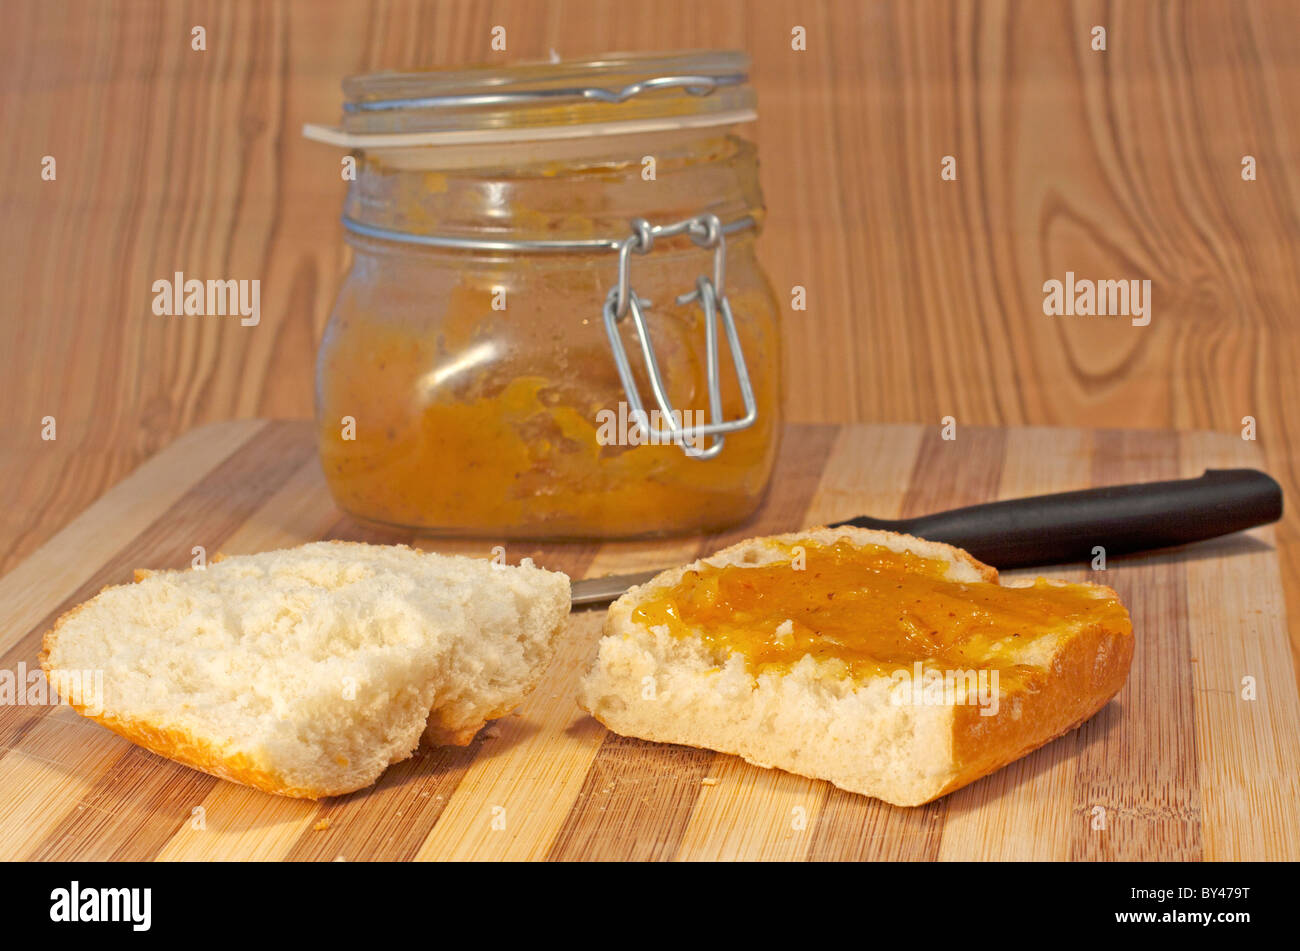 Cut bread with orange jam over wooden background Stock Photo